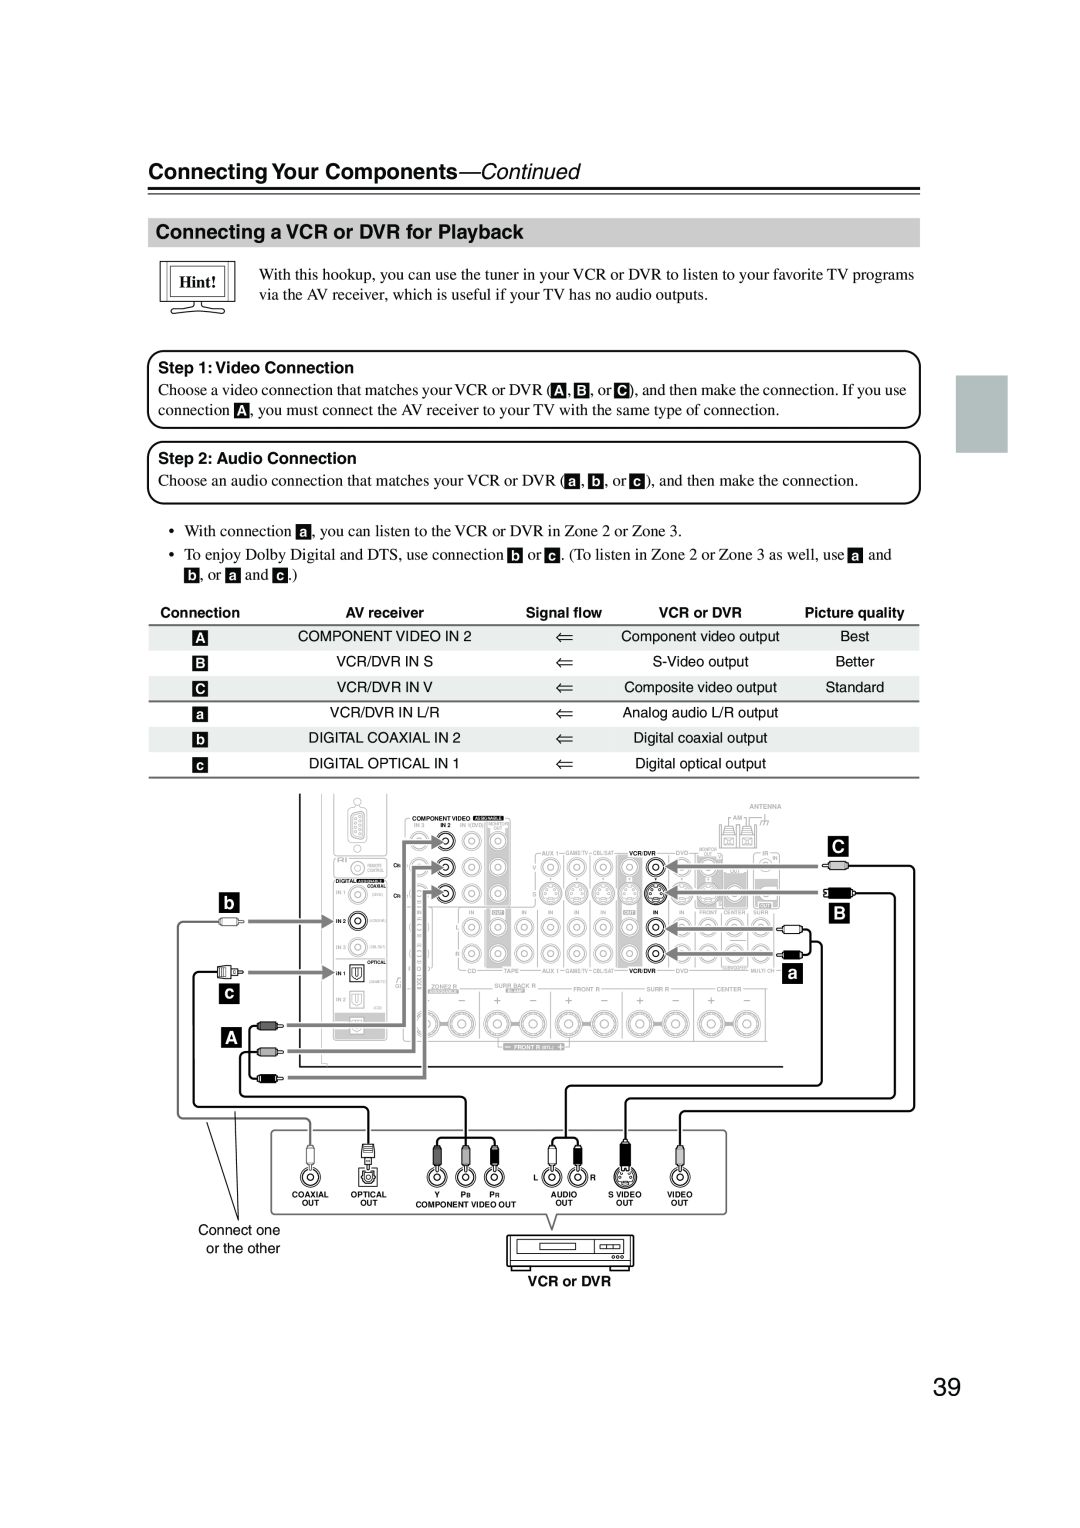 Onkyo TX-NR905 instruction manual Connecting a VCR or DVR for Playback, Connecting Your Components—Continued, Hint 